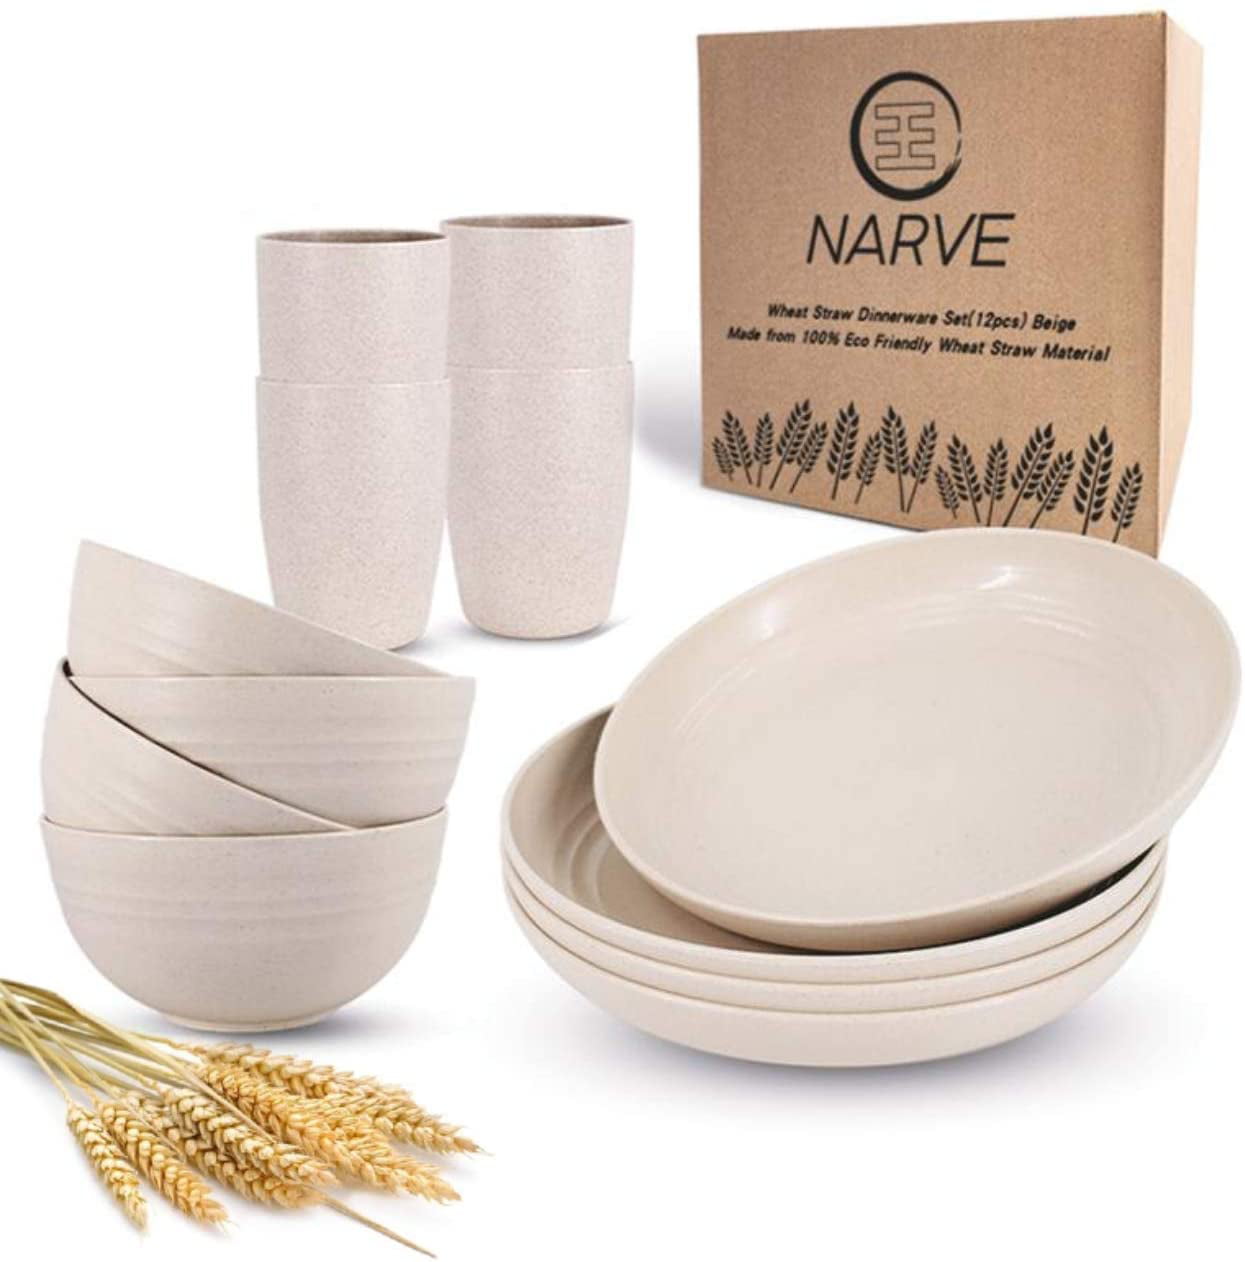 BPA Free 4 pcs 10 inch Unbreakable Lightweight Dinnerware Sets with Utensils Reusable Eco Friendly Plates Coolleya Wheat Straw Plates Dishwasher and Microwave Safe Dinner Plates 